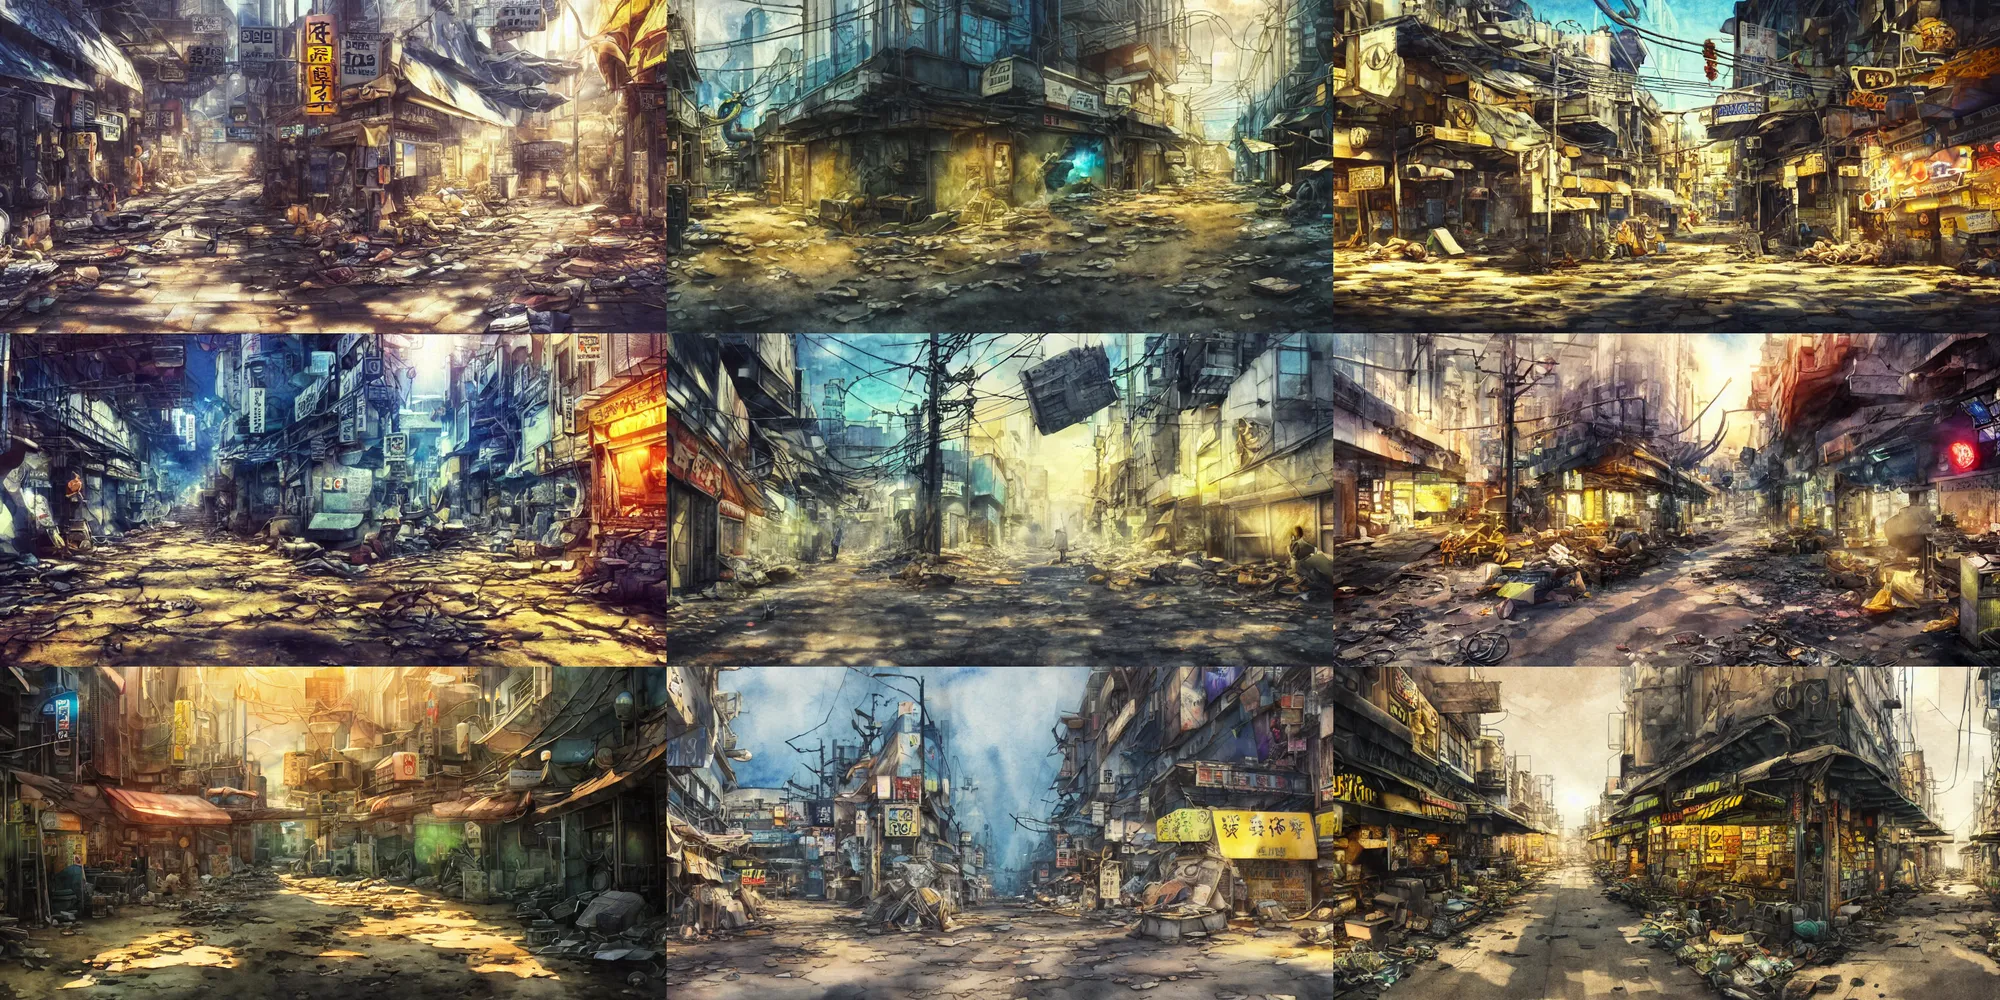 Prompt: incredible anime movie scene, watercolor, underwater market, empty road, coral, harsh bloom lighting, rim light, abandoned city, paper texture, movie scene, caustics shadows, deserted shinjuku junk town, old pawn shop, bright sun ground, wires, telephone pole, pipes, yellow dragon head